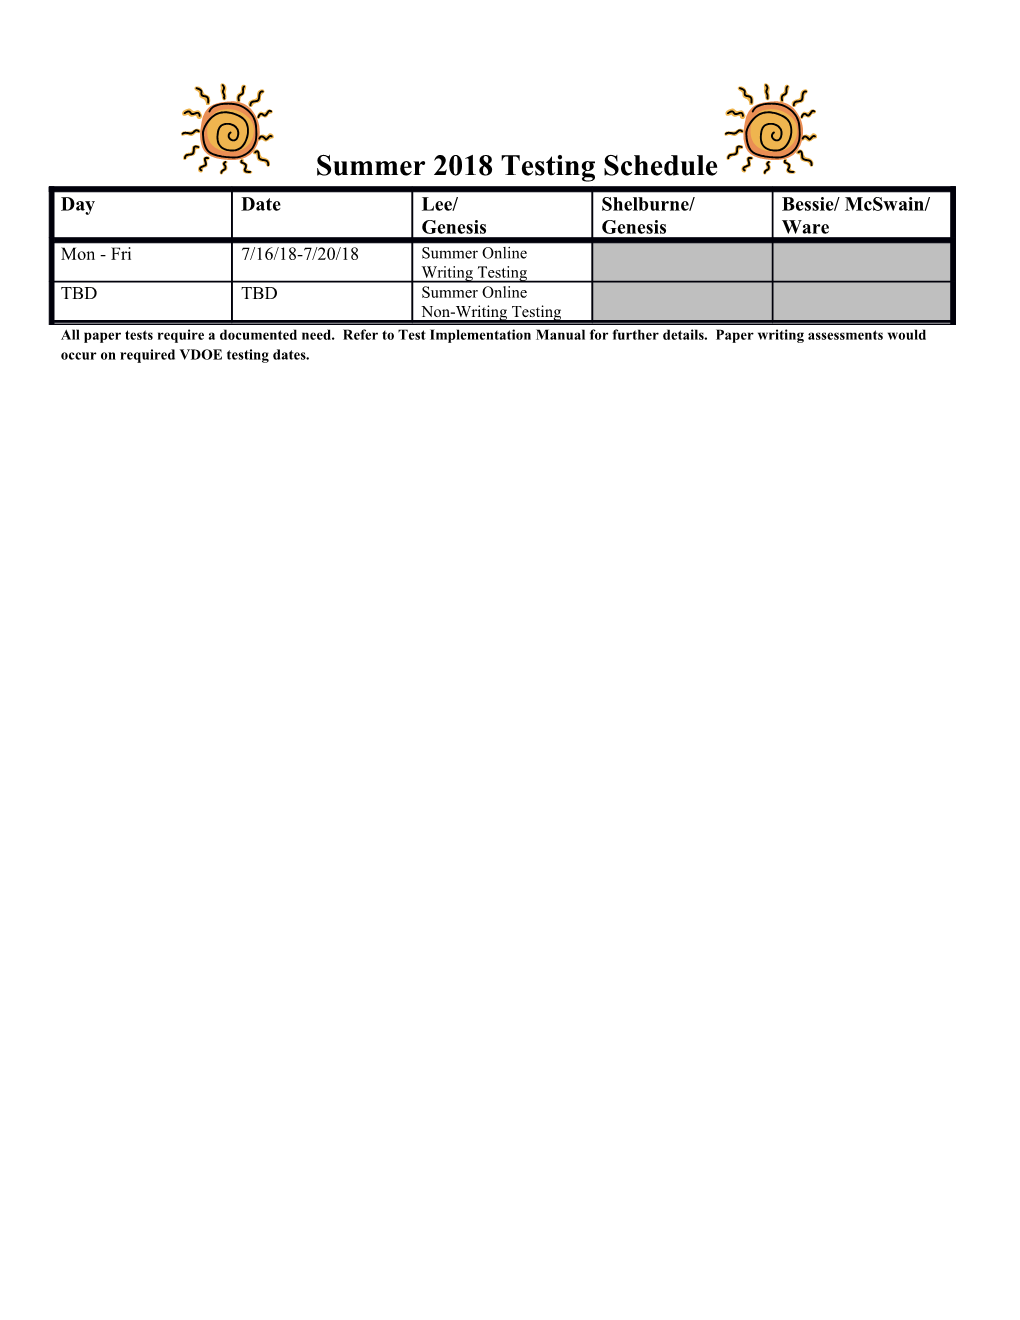 SOL Reports for 2017-2018 Will Be Mailed Home with Report Cards on Wednesday, June 6, 2018